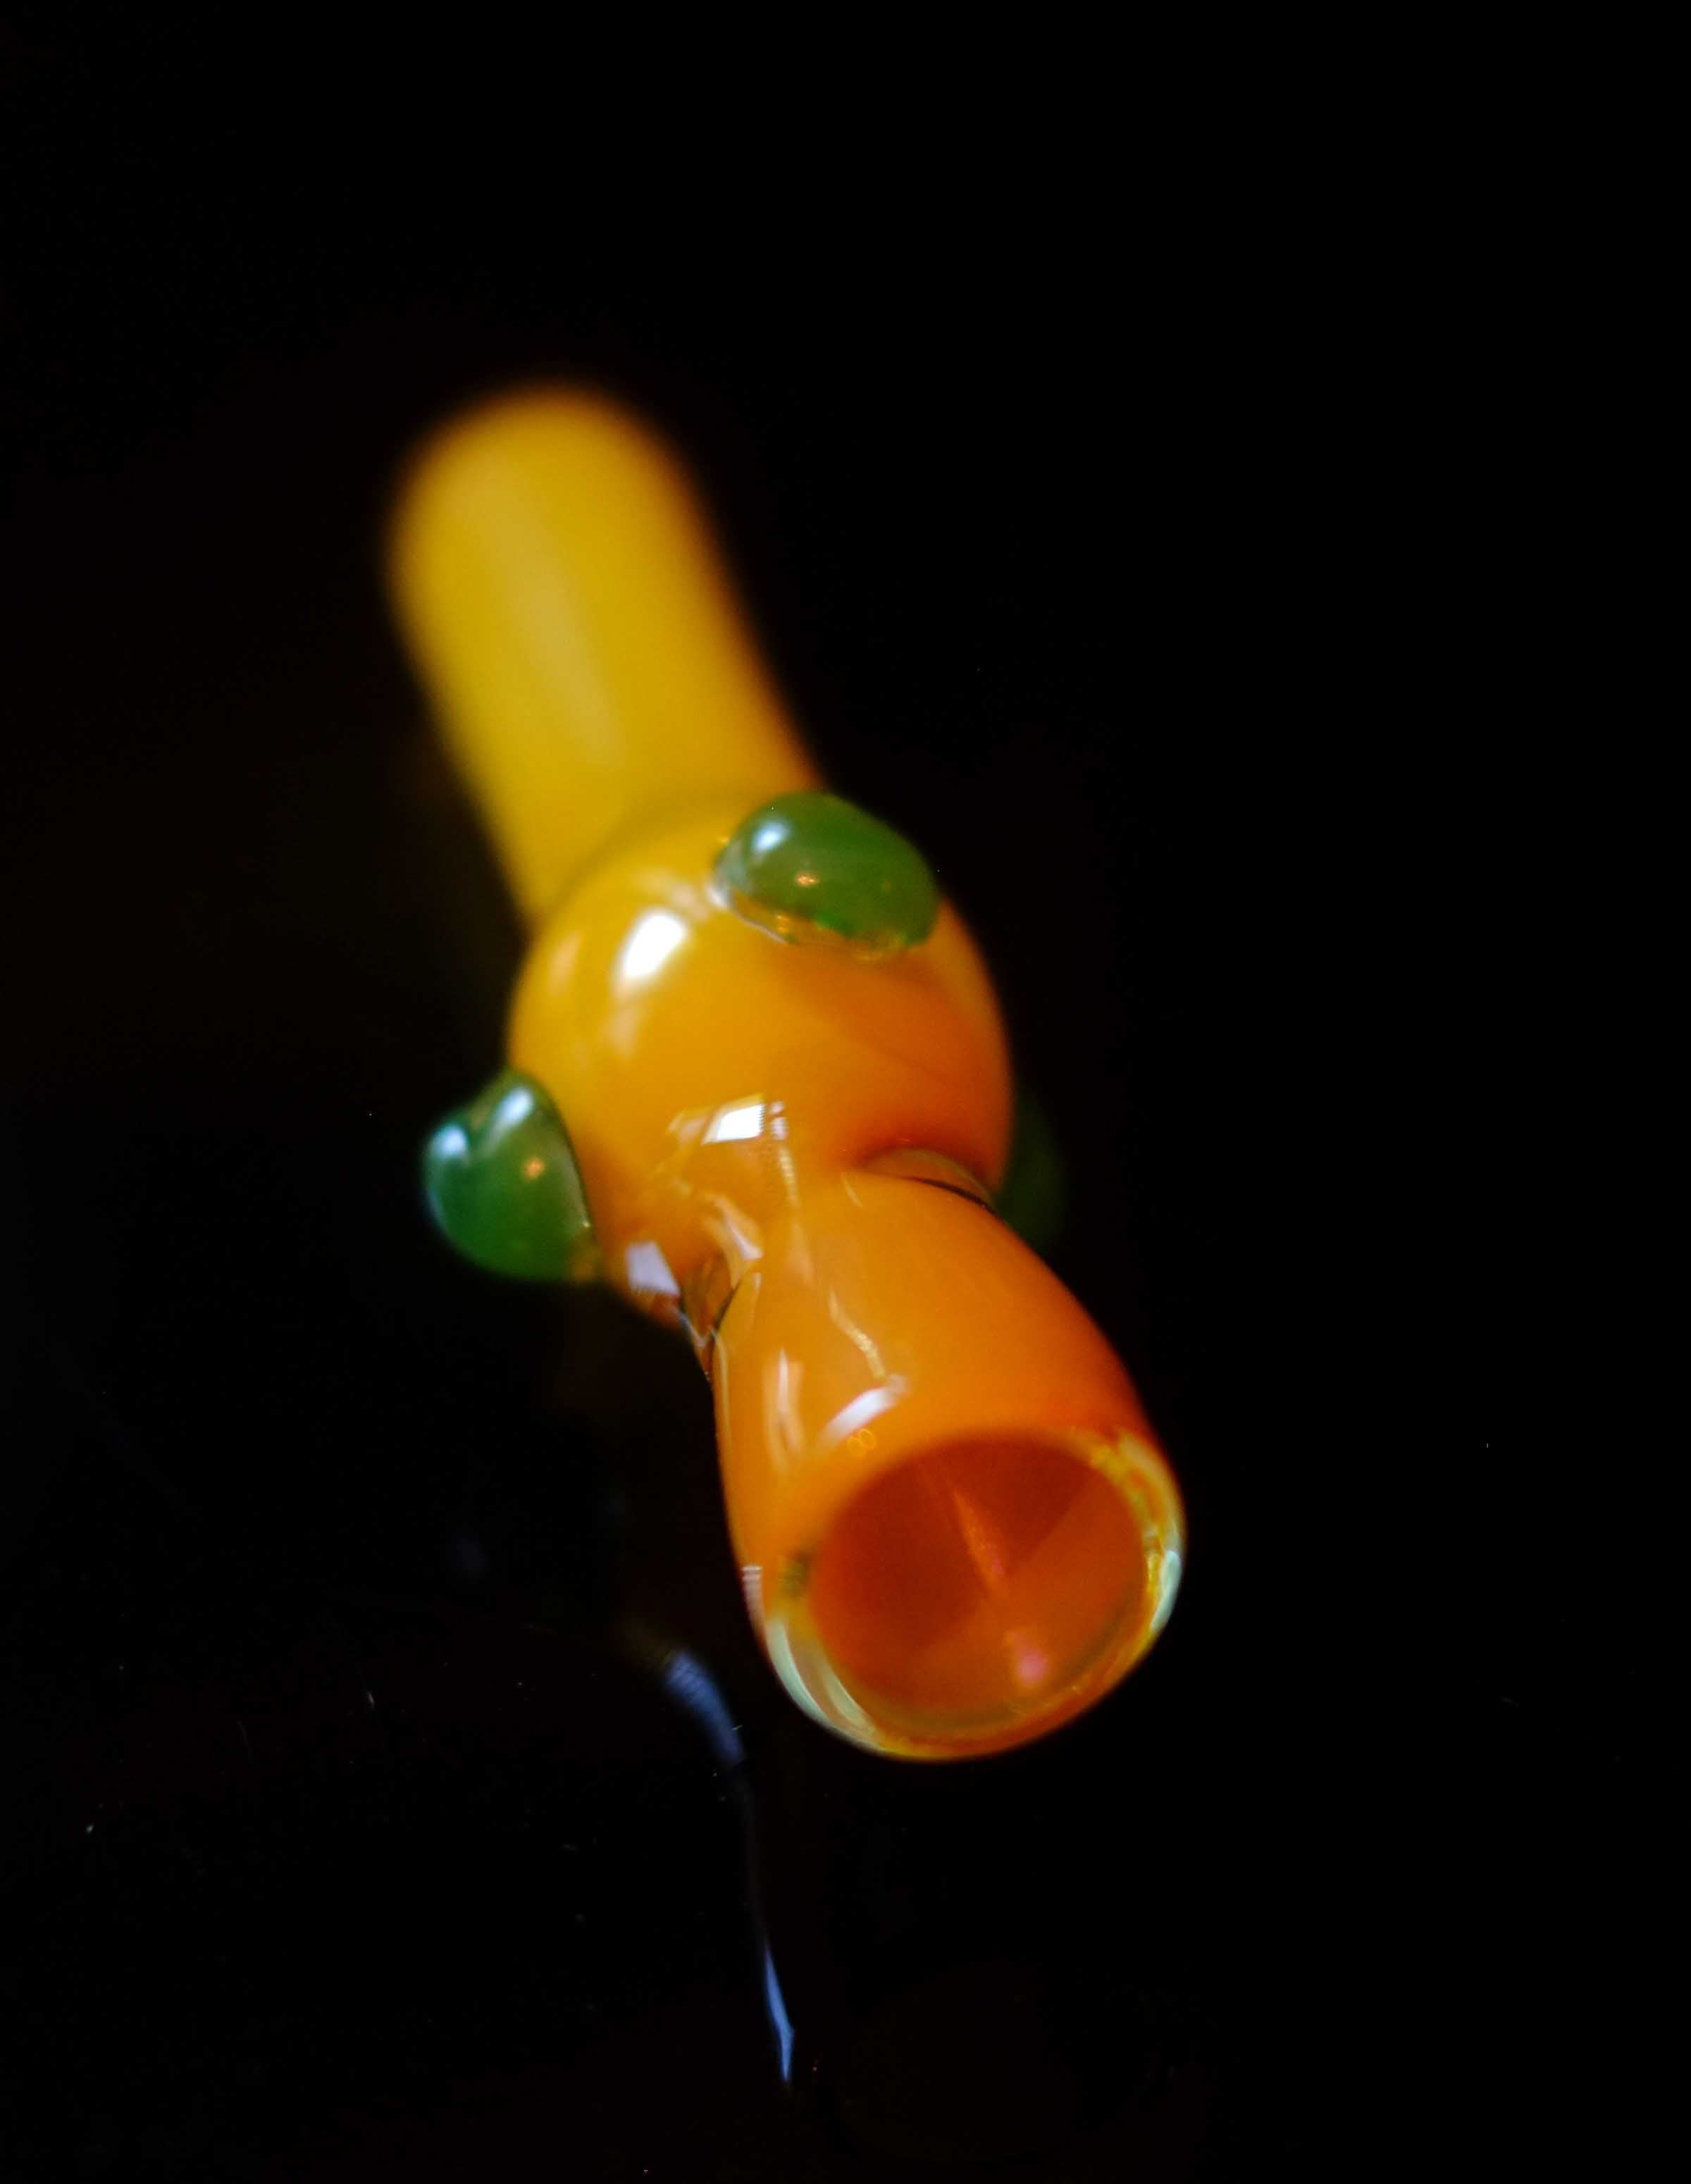 4" Glass Chillum Pipe in Orange with blue dots